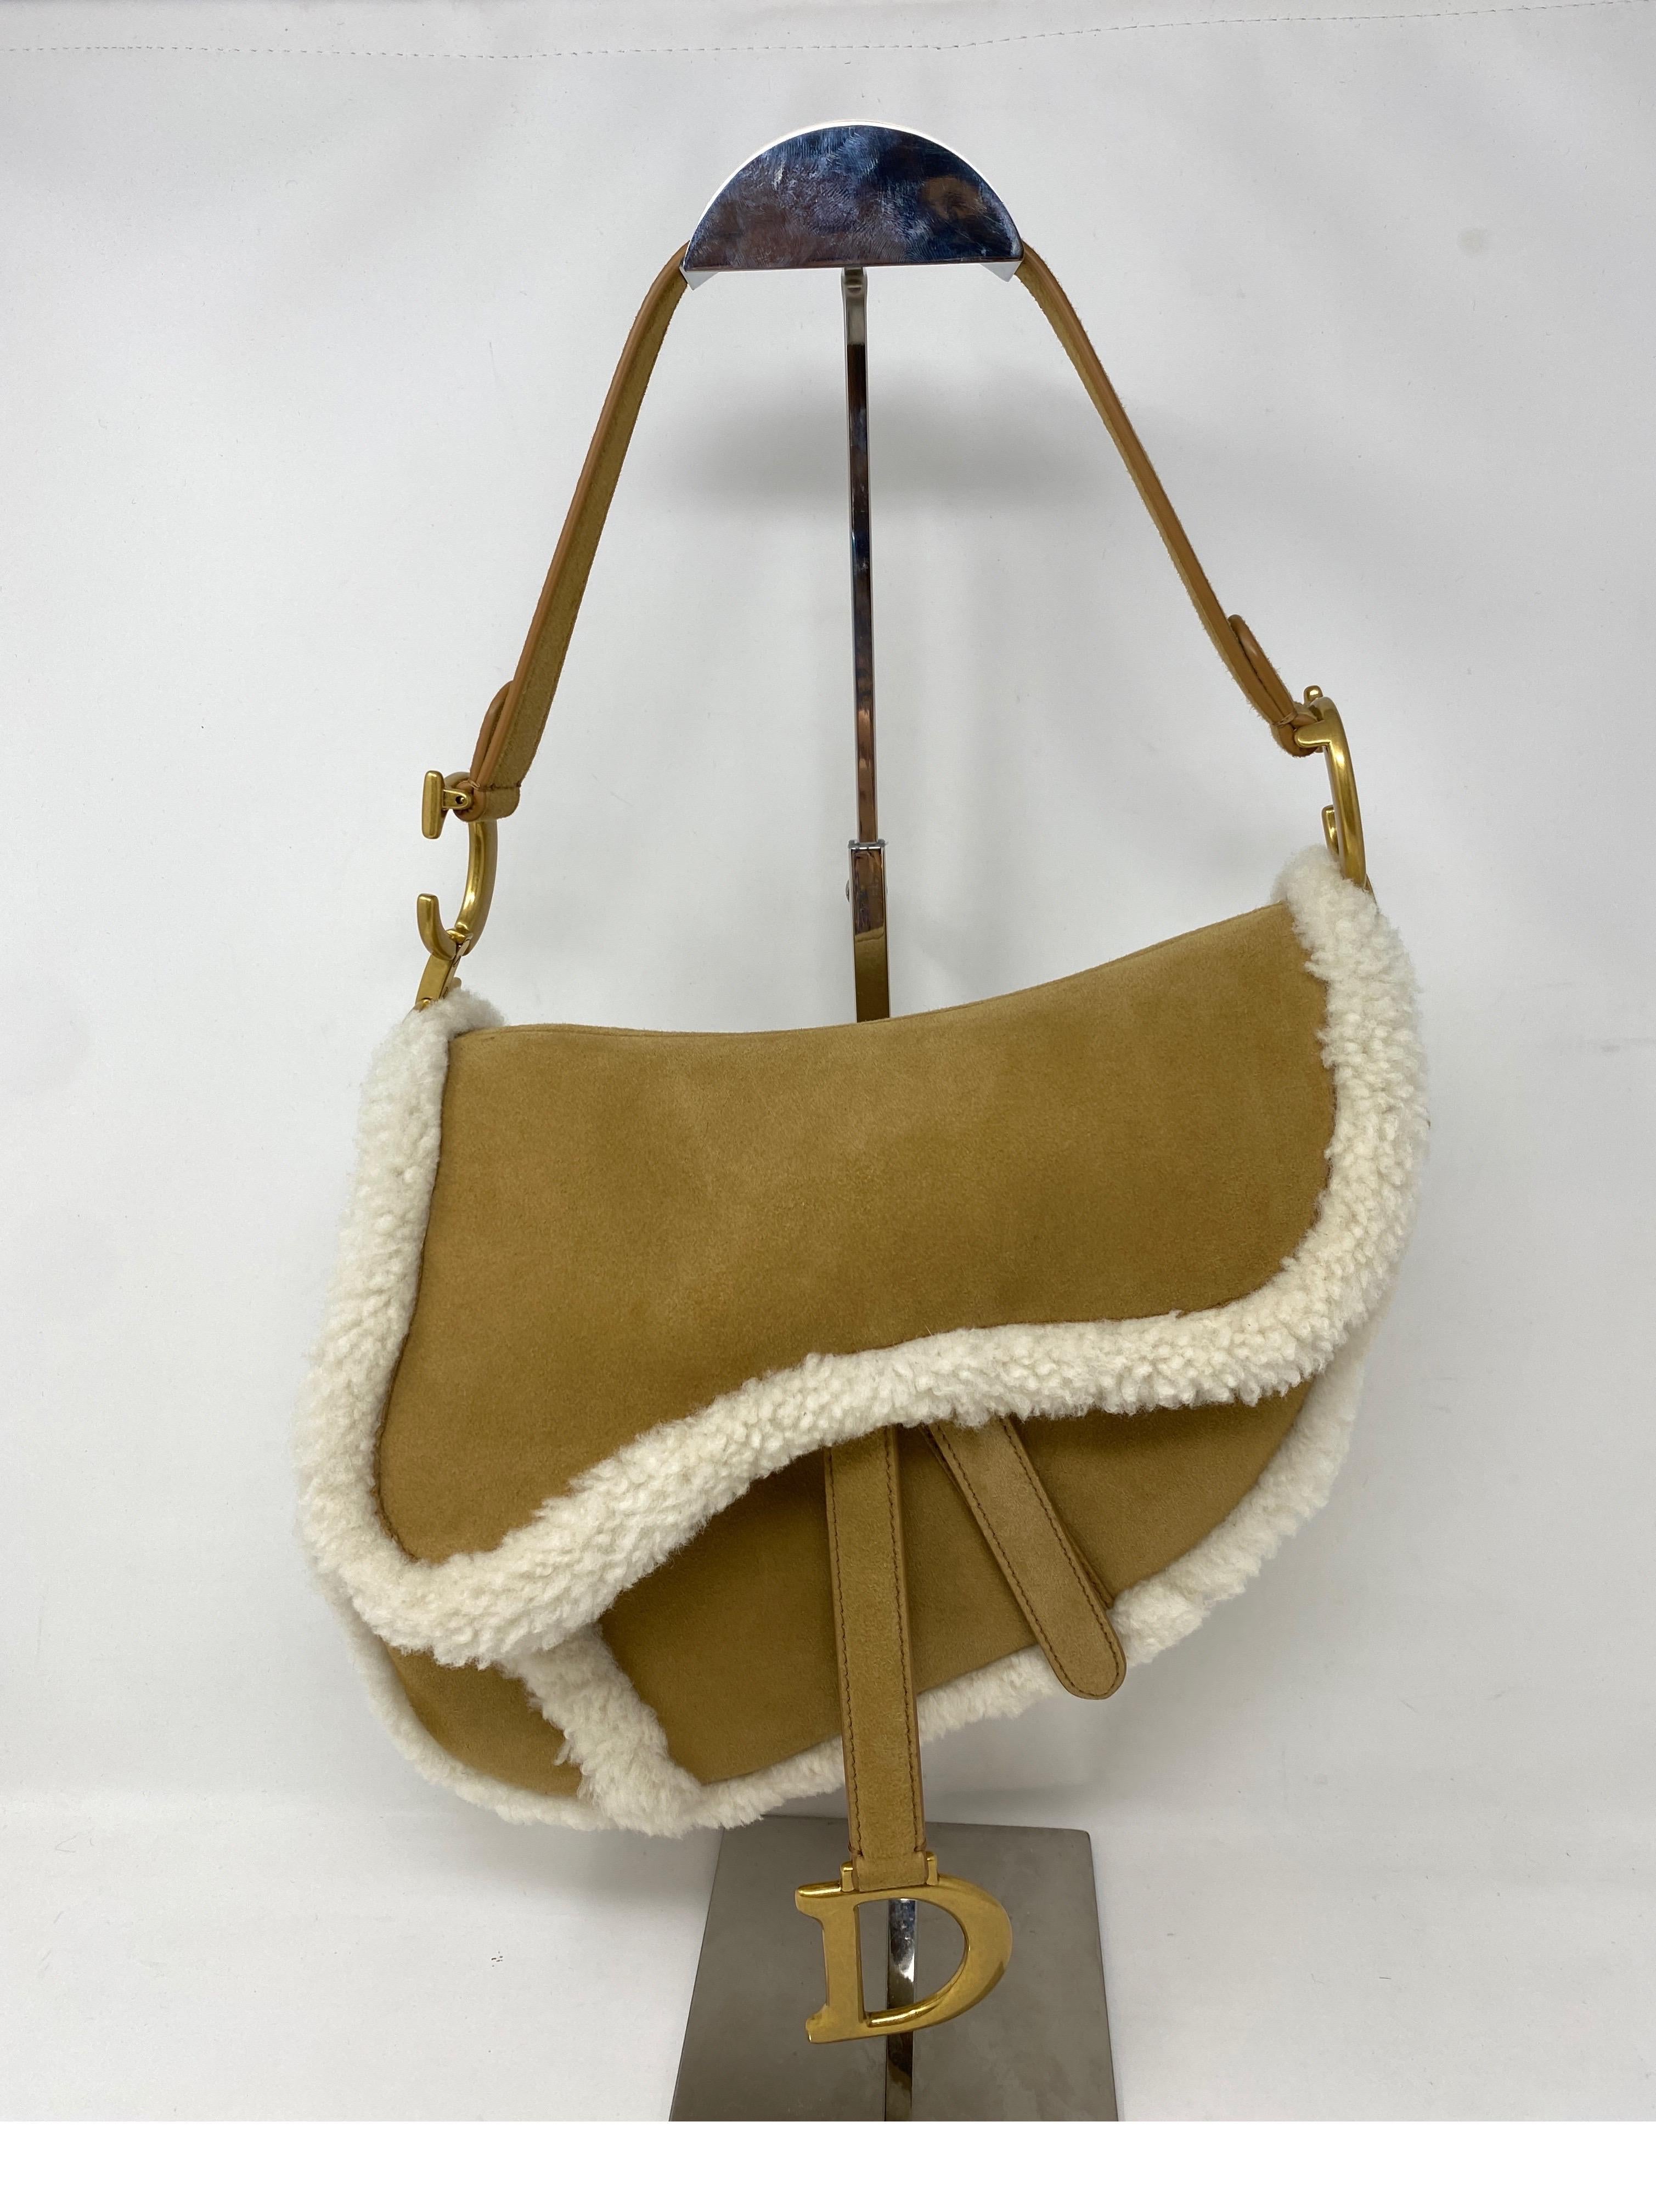 Christian Dior Sheepskin Saddle Bag. Mint condition like new. Beautiful sheepskin and tan suede saddle bag. Iconic design and most wanted style of the moment. Includes dust cover and box. Guaranteed authentic. 